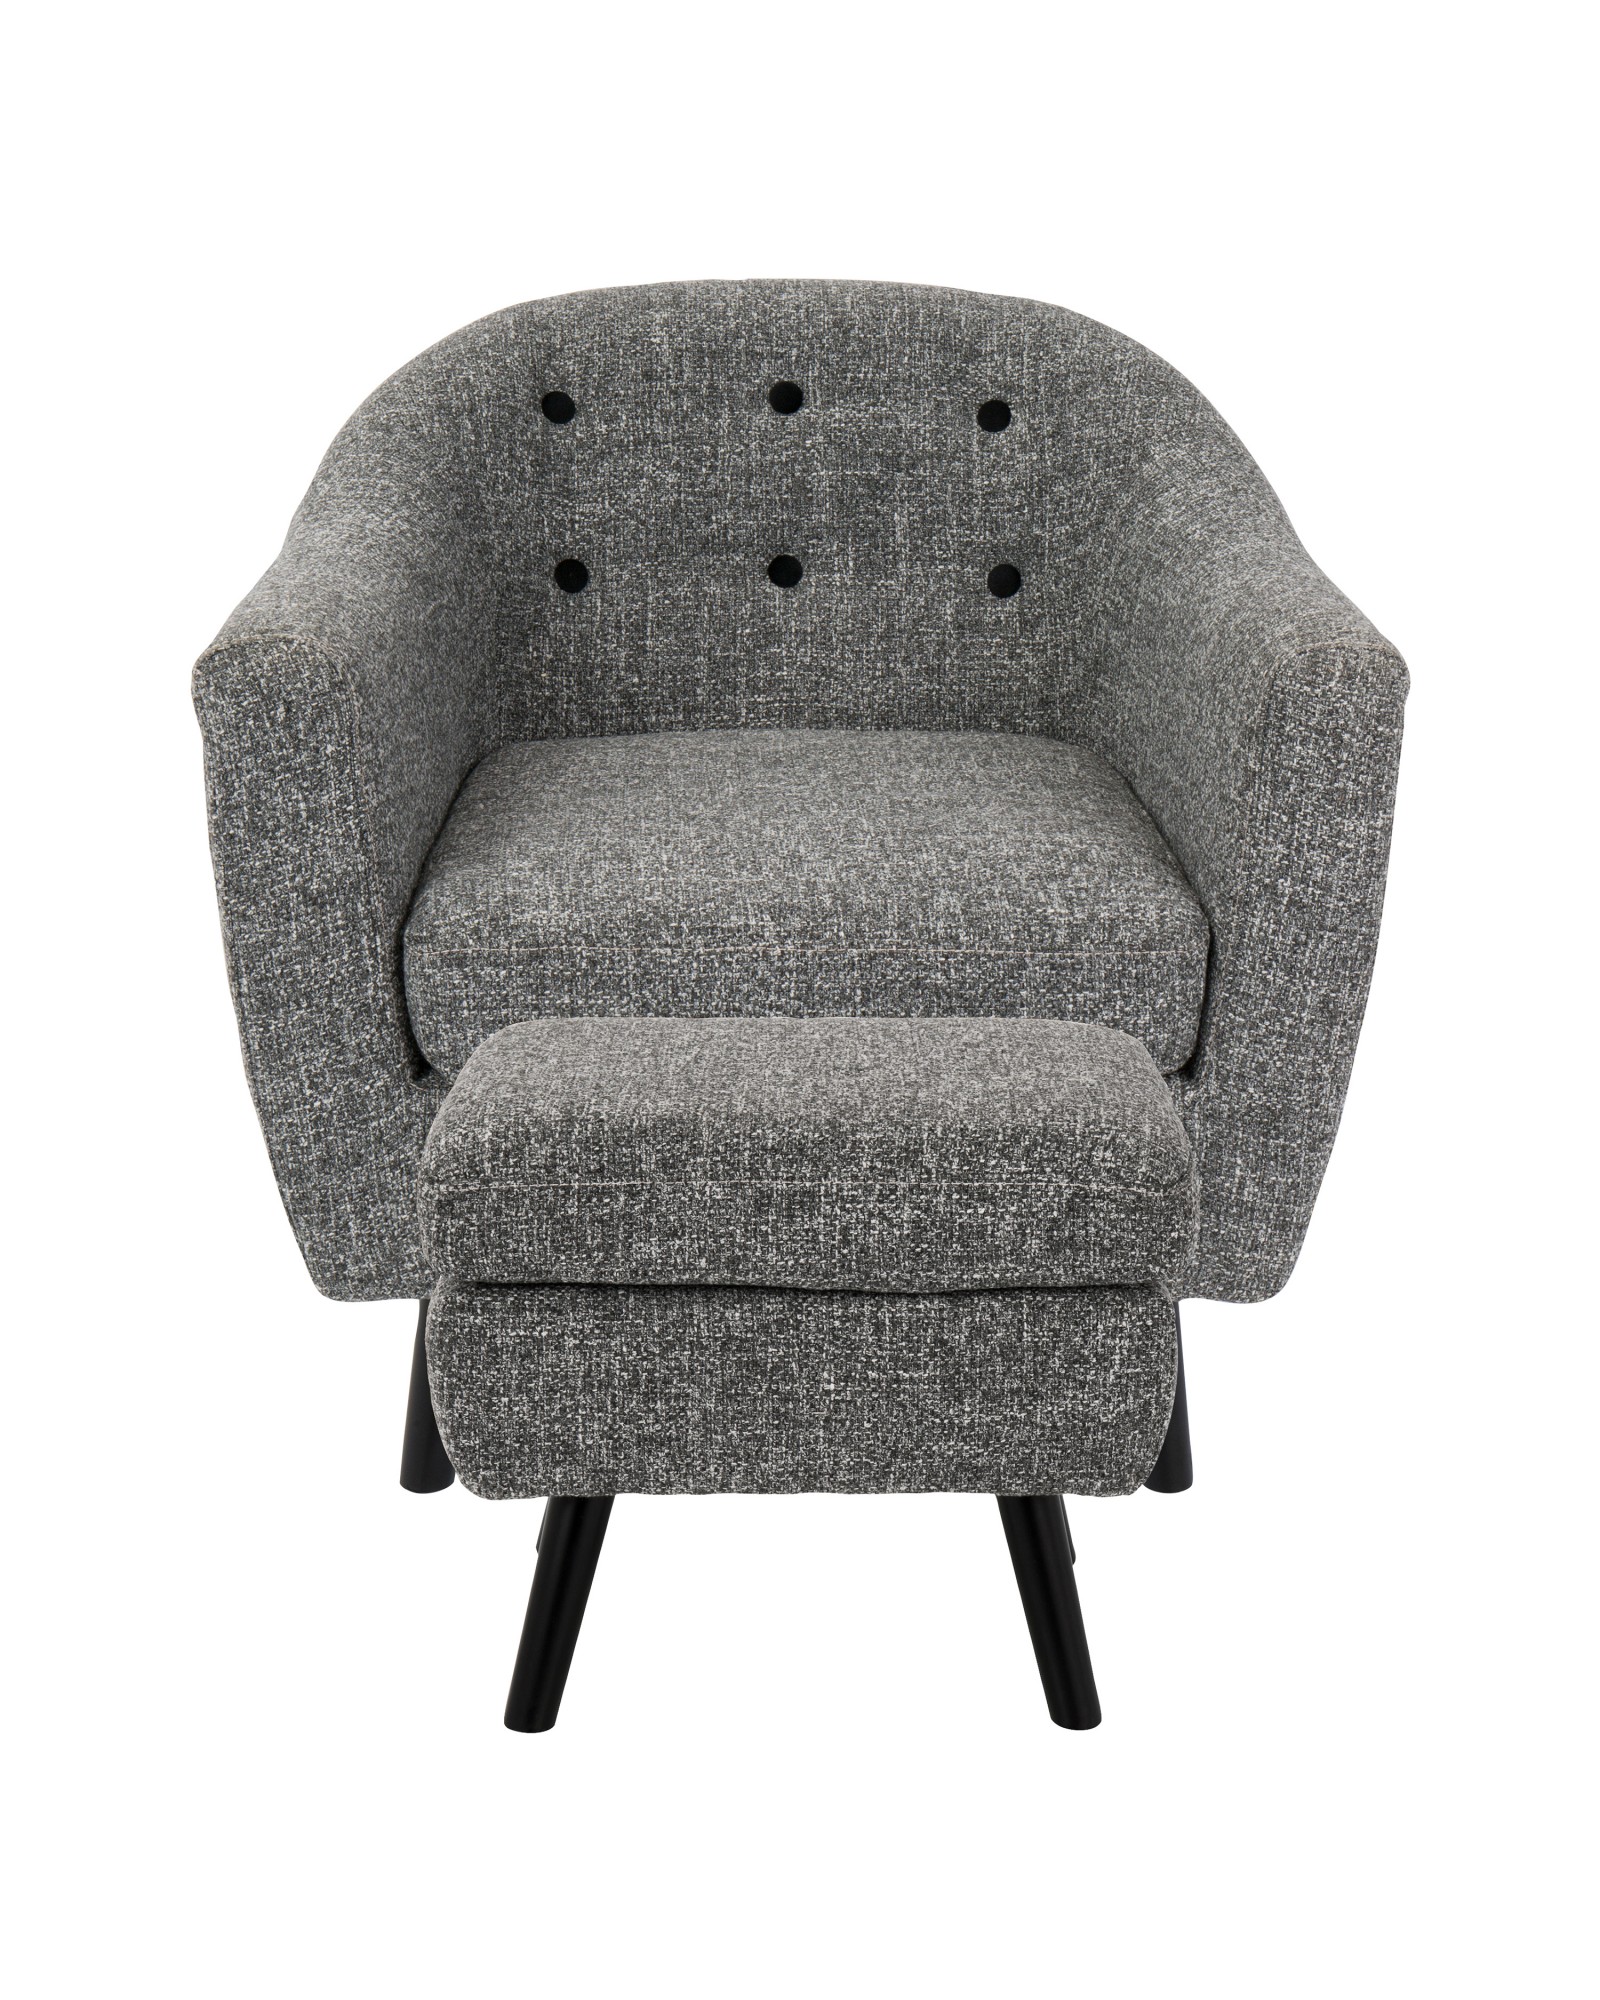 Rockwell Mid-Century Modern Accent Chair and Ottoman in Dark Grey Noise Fabric